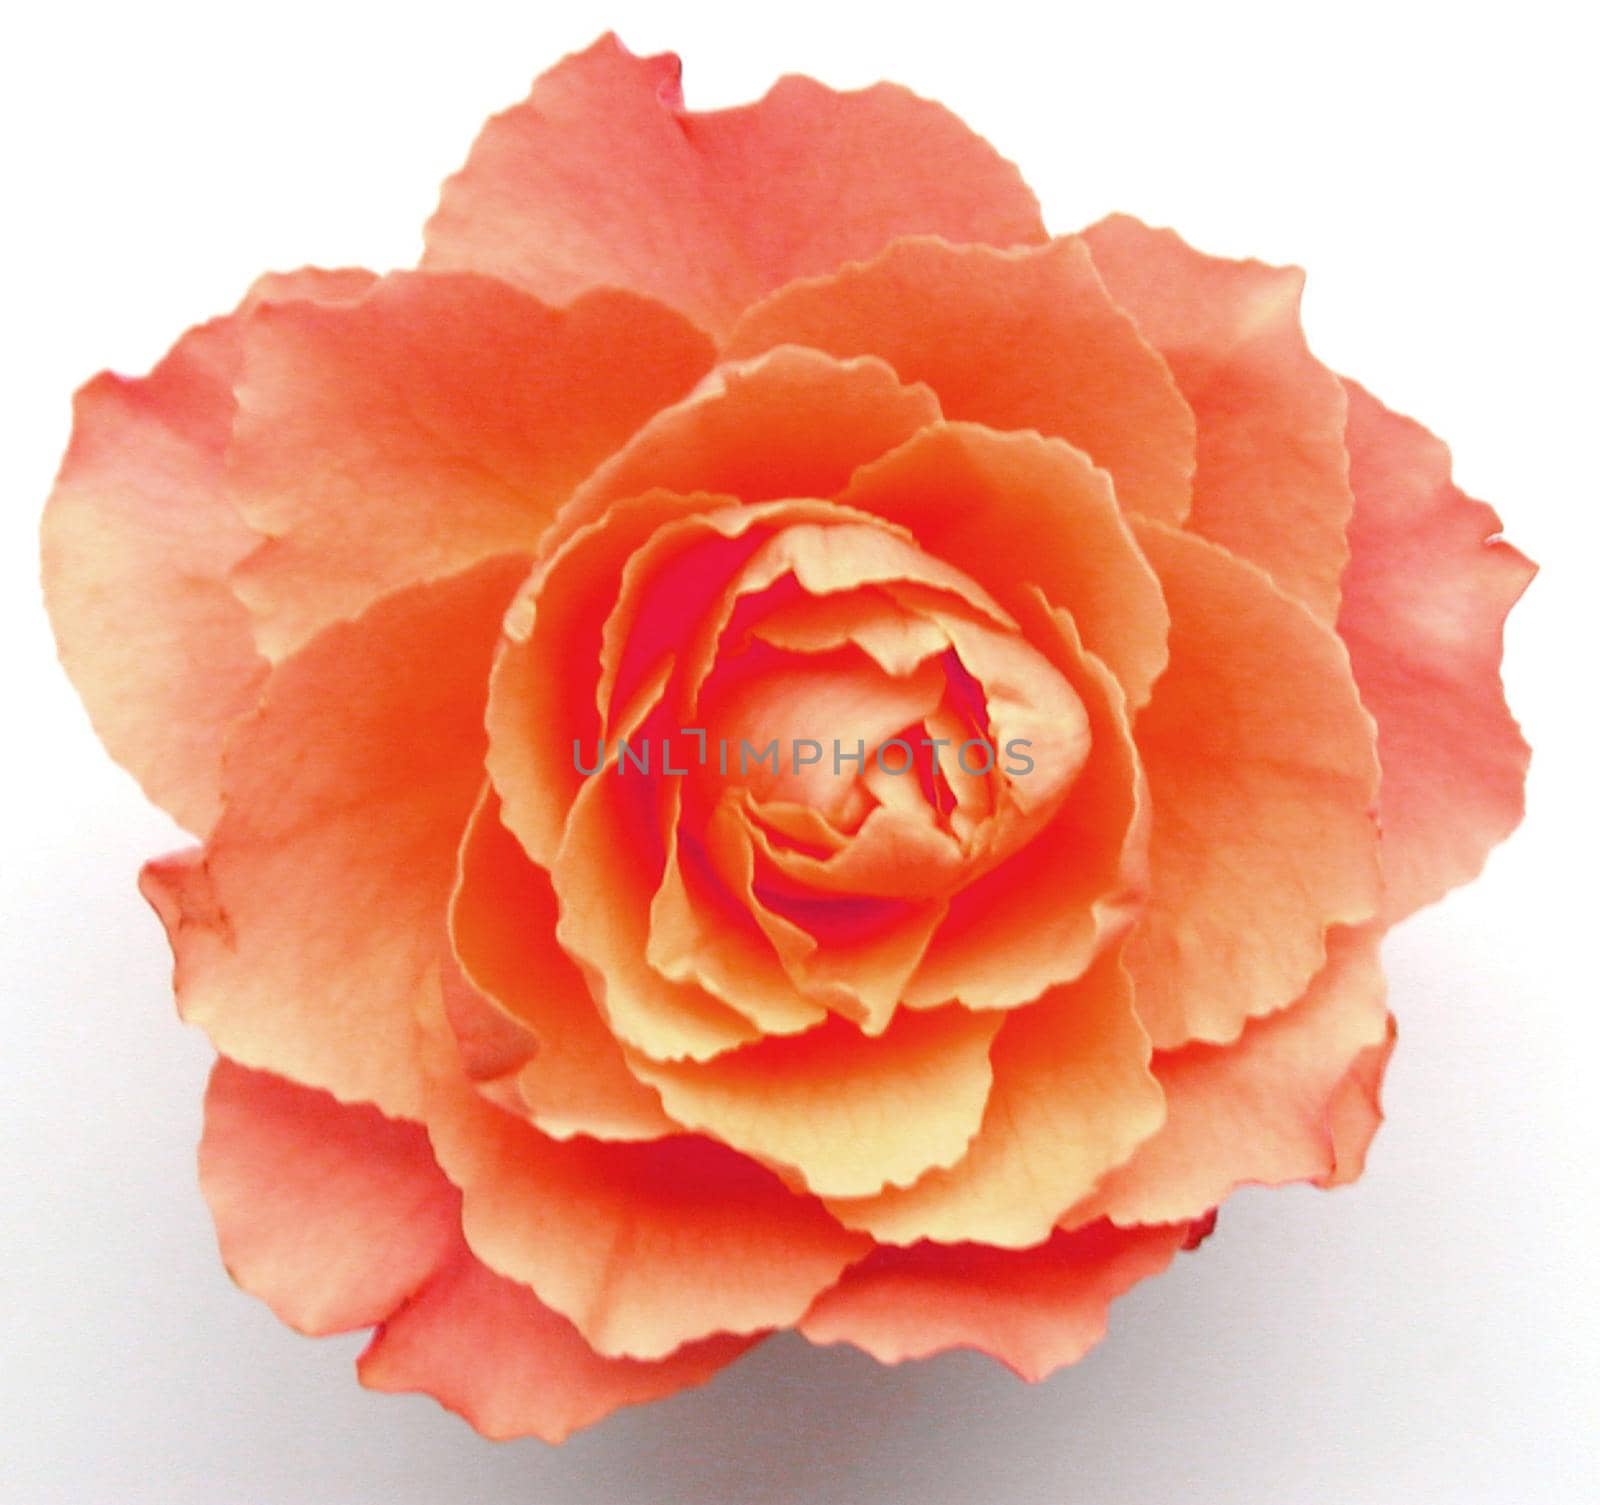 Beauty in nature - a perfect orange rose in close up detail over a white background, symbolic of love